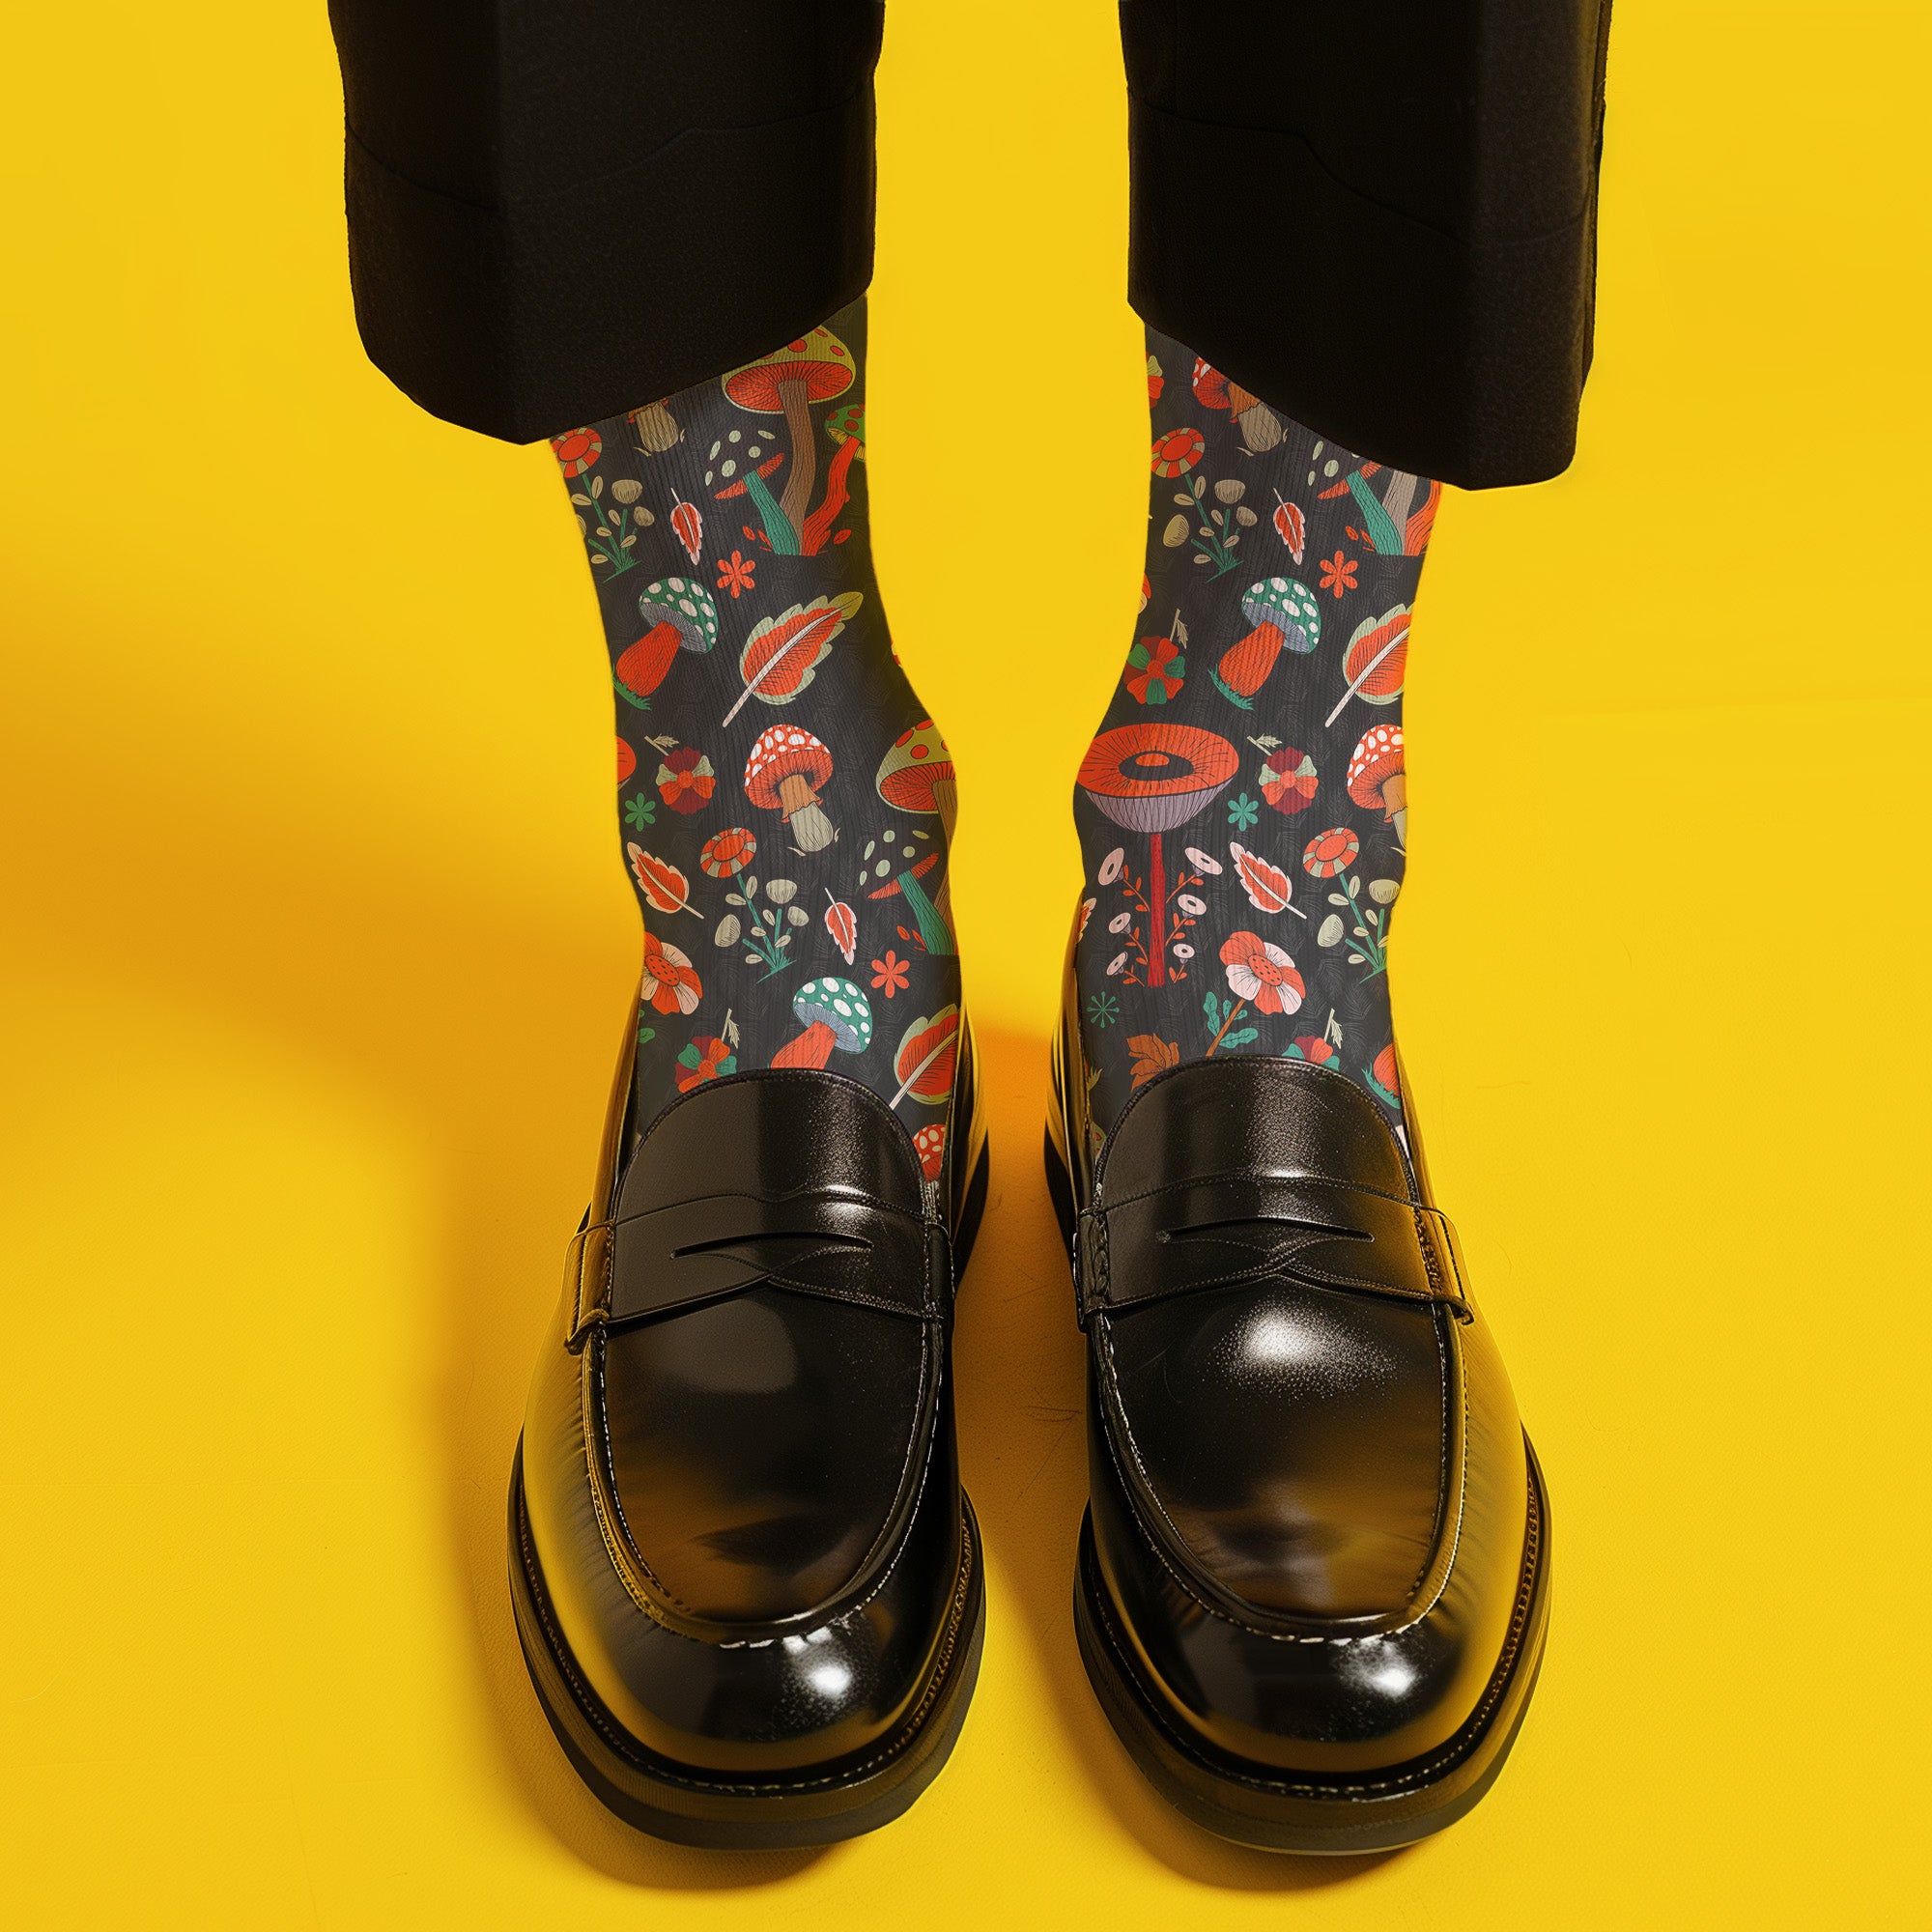 Stylish black socks with a vibrant pattern of mushrooms and nature elements, featuring black heels and toes, ideal for those who appreciate quirky and whimsical designs.